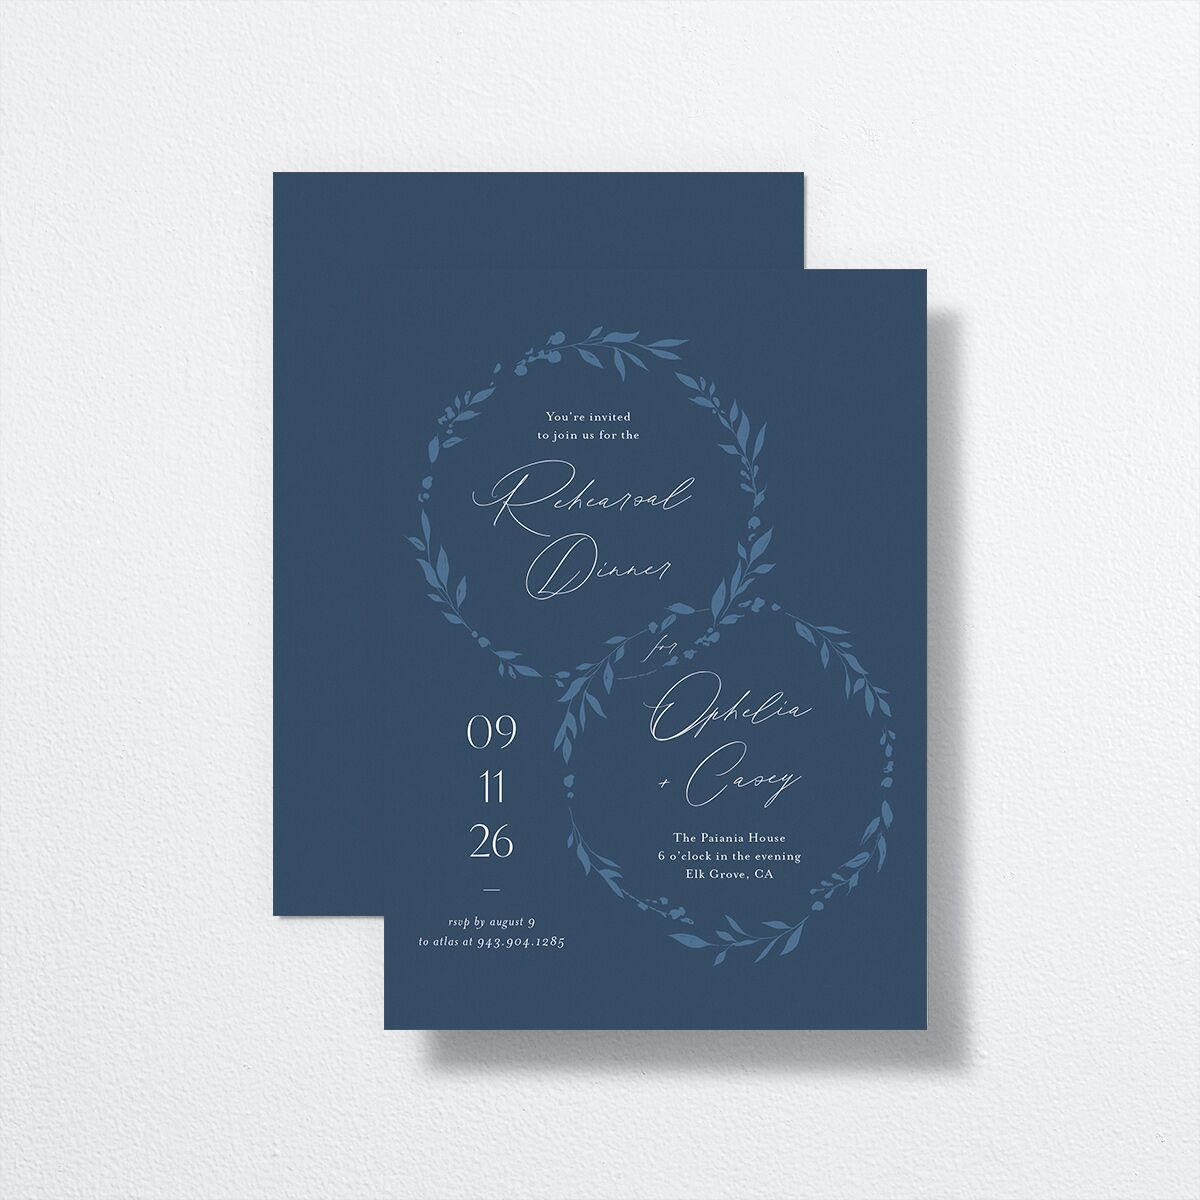 Stefana Crowns Rehearsal Dinner Invitations front-and-back in blue